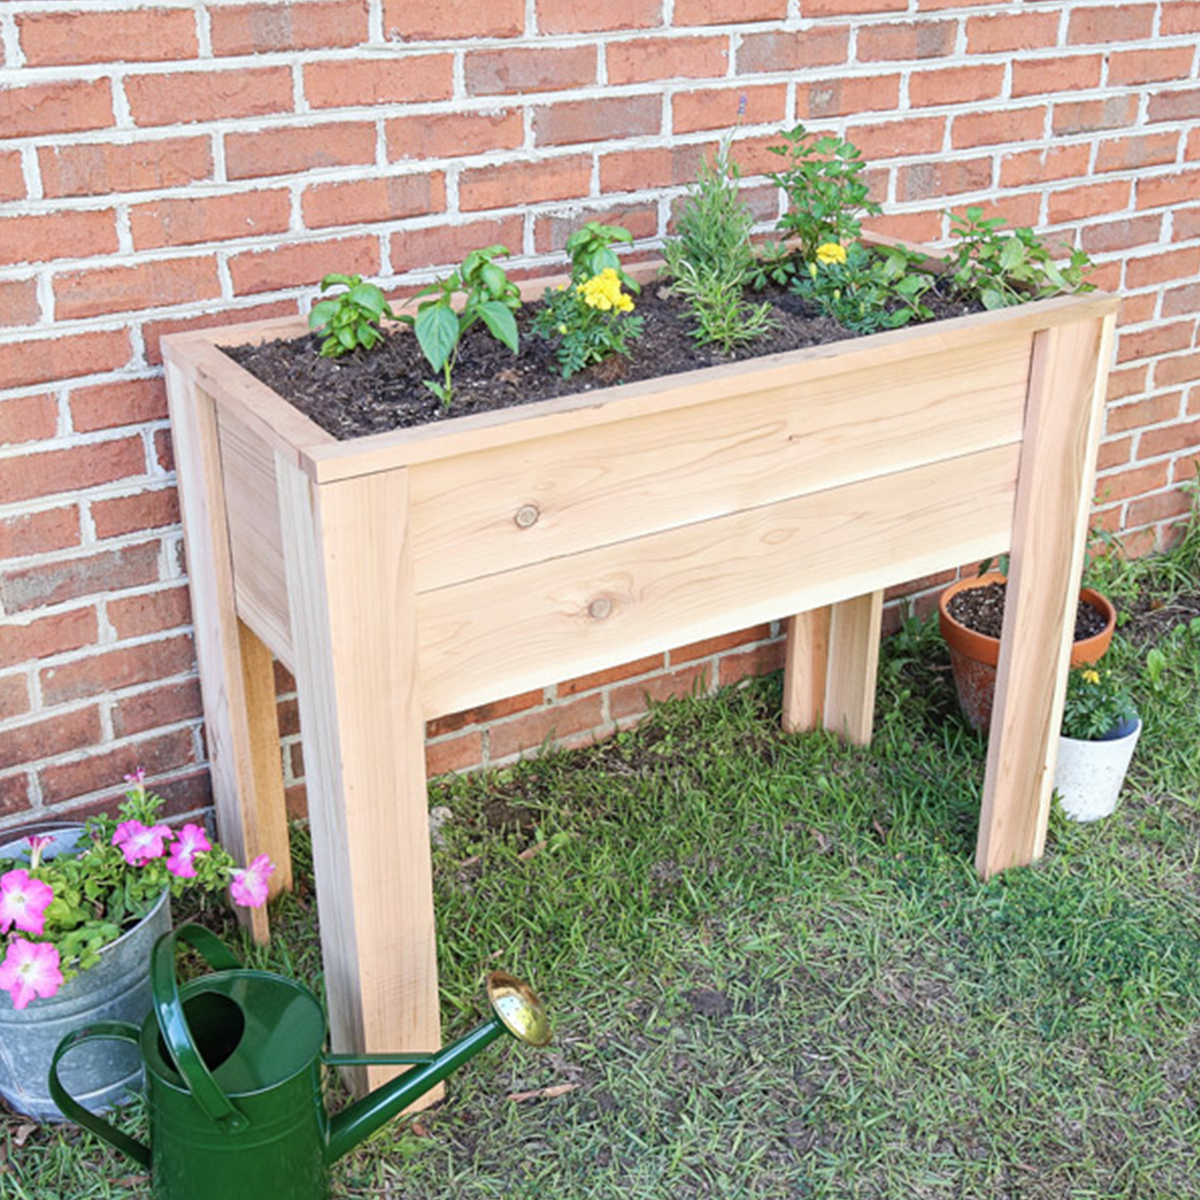 How to Build a Raised Garden Bed with Legs   Angela Marie Made